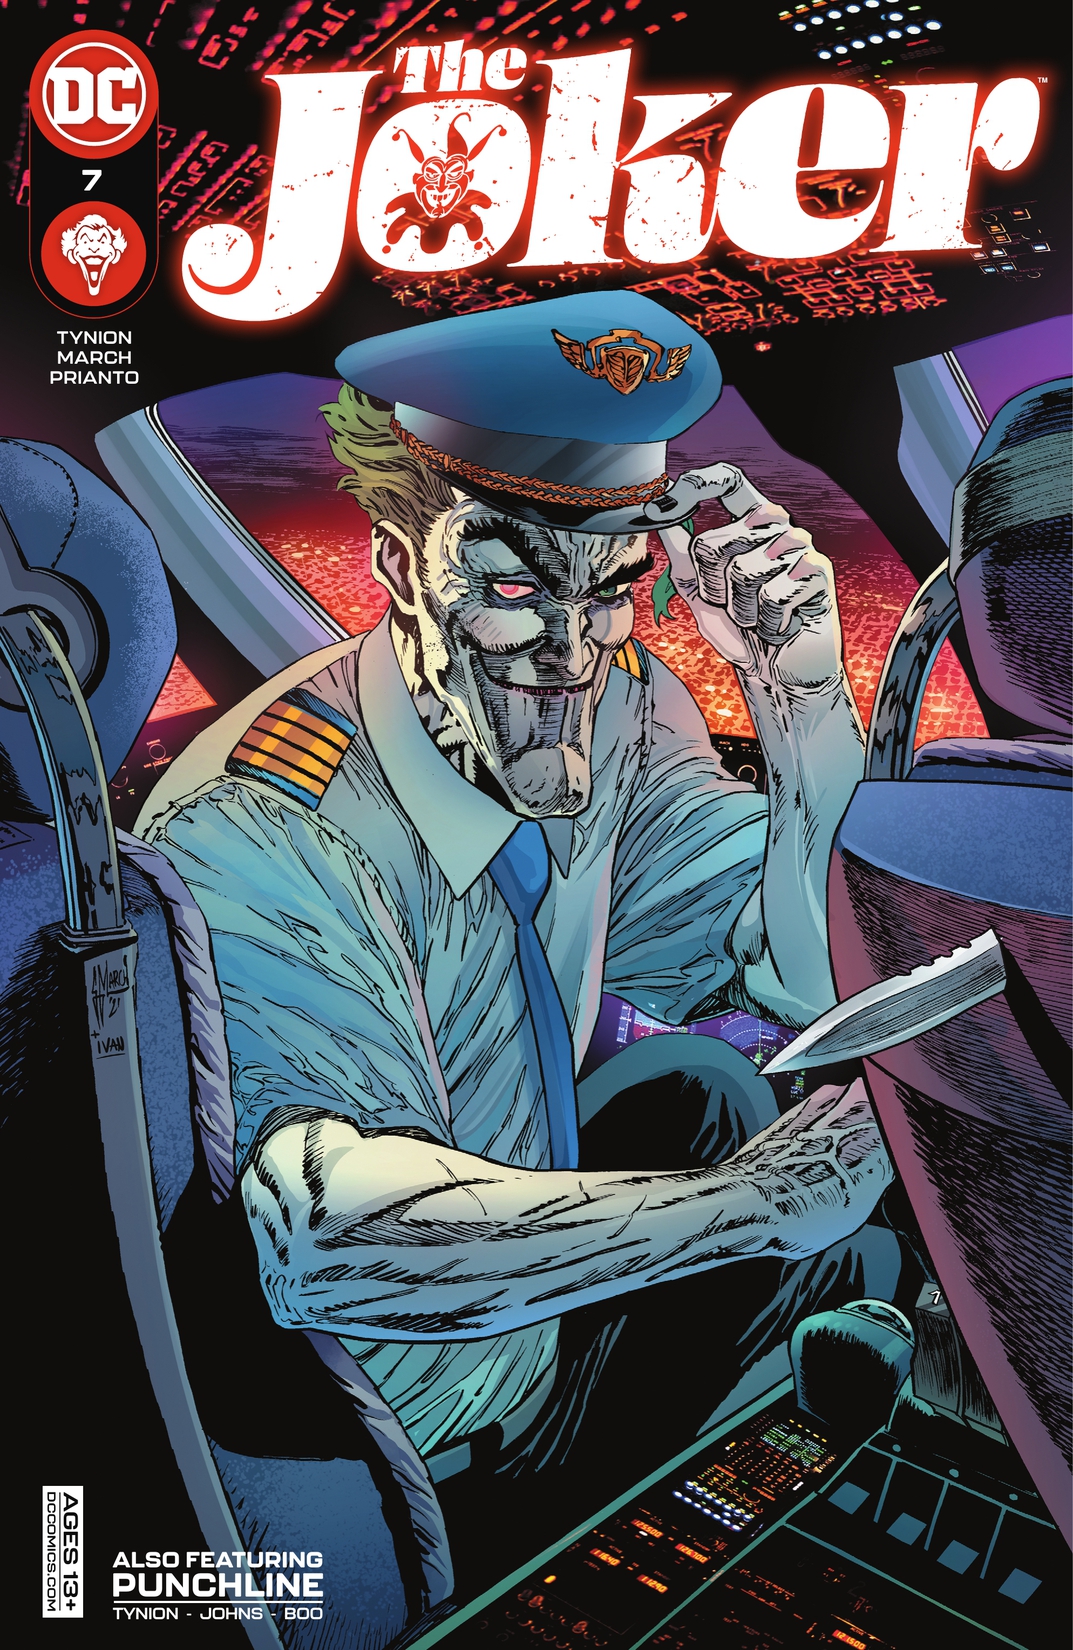 The Joker (2021-) #7 preview images